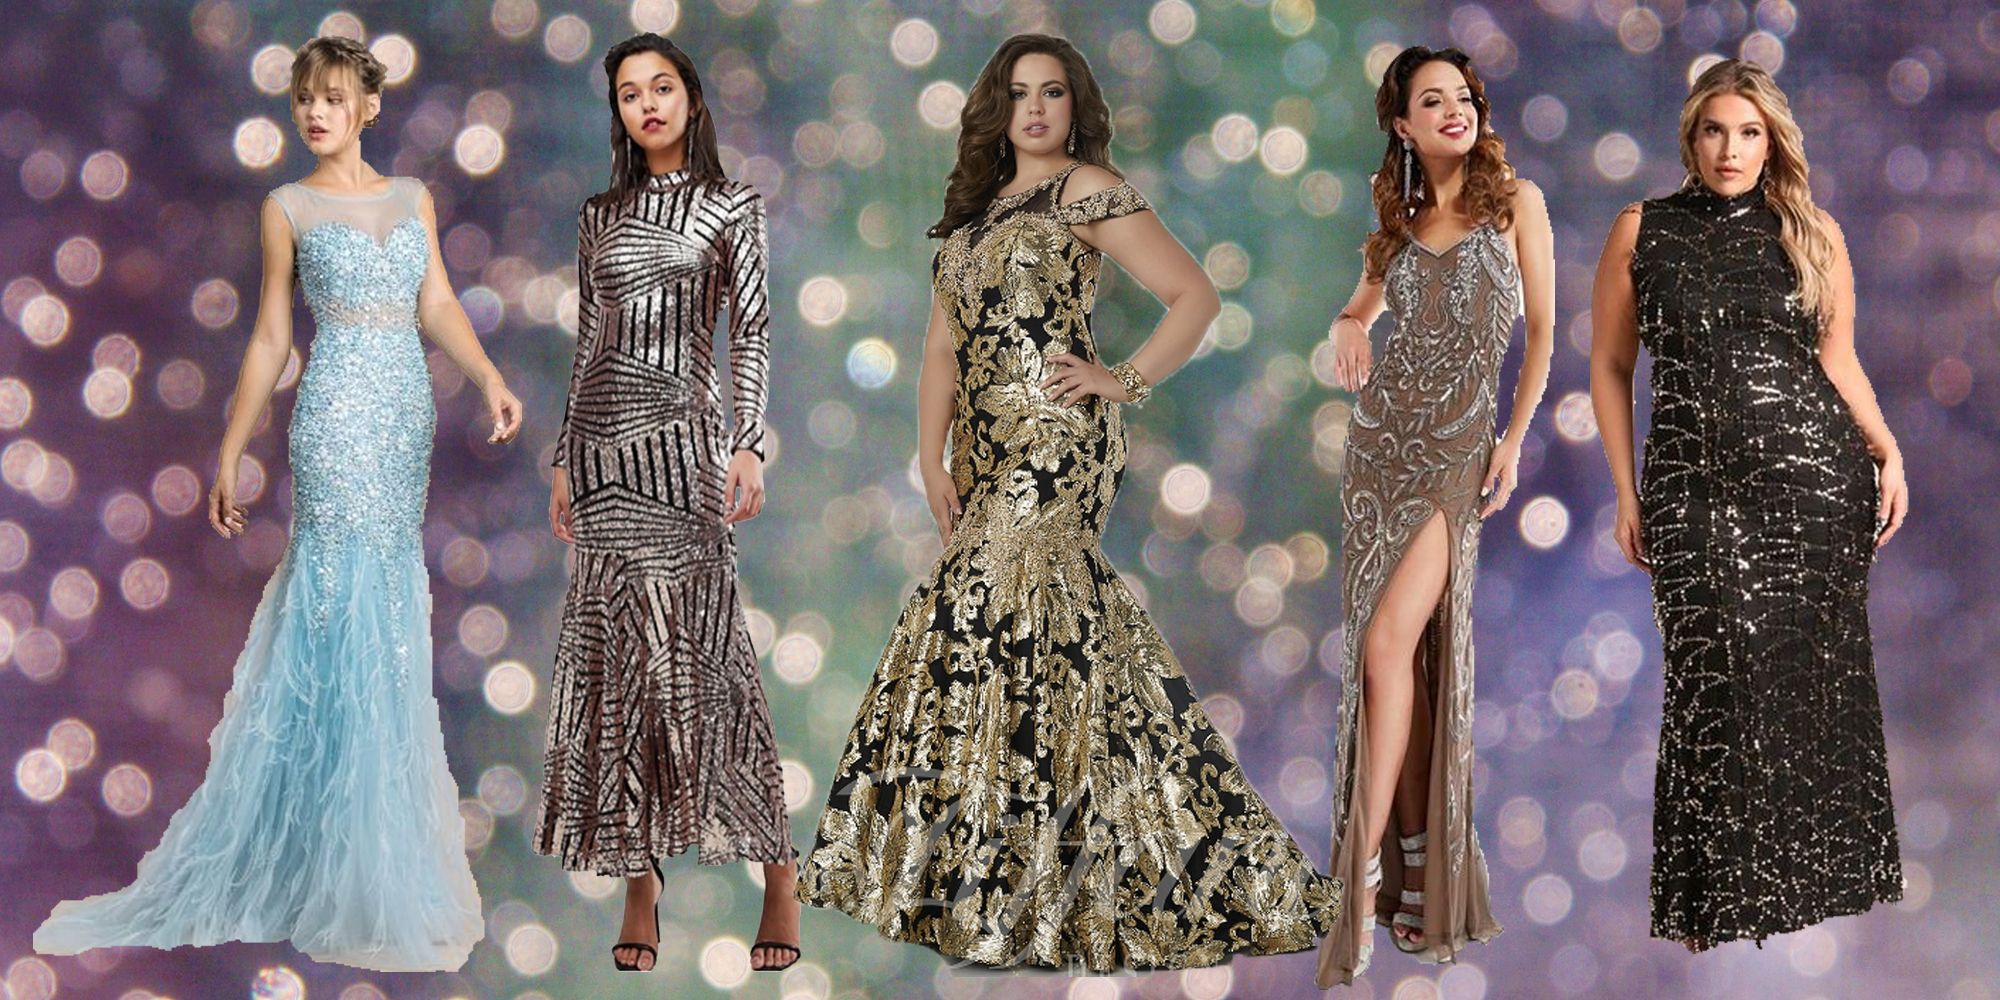 Here Are All The Outfits Bollywood Celebs Wore At The IIFA Awards 2018 |  Indian wedding gowns, Gowns, Engagement gowns